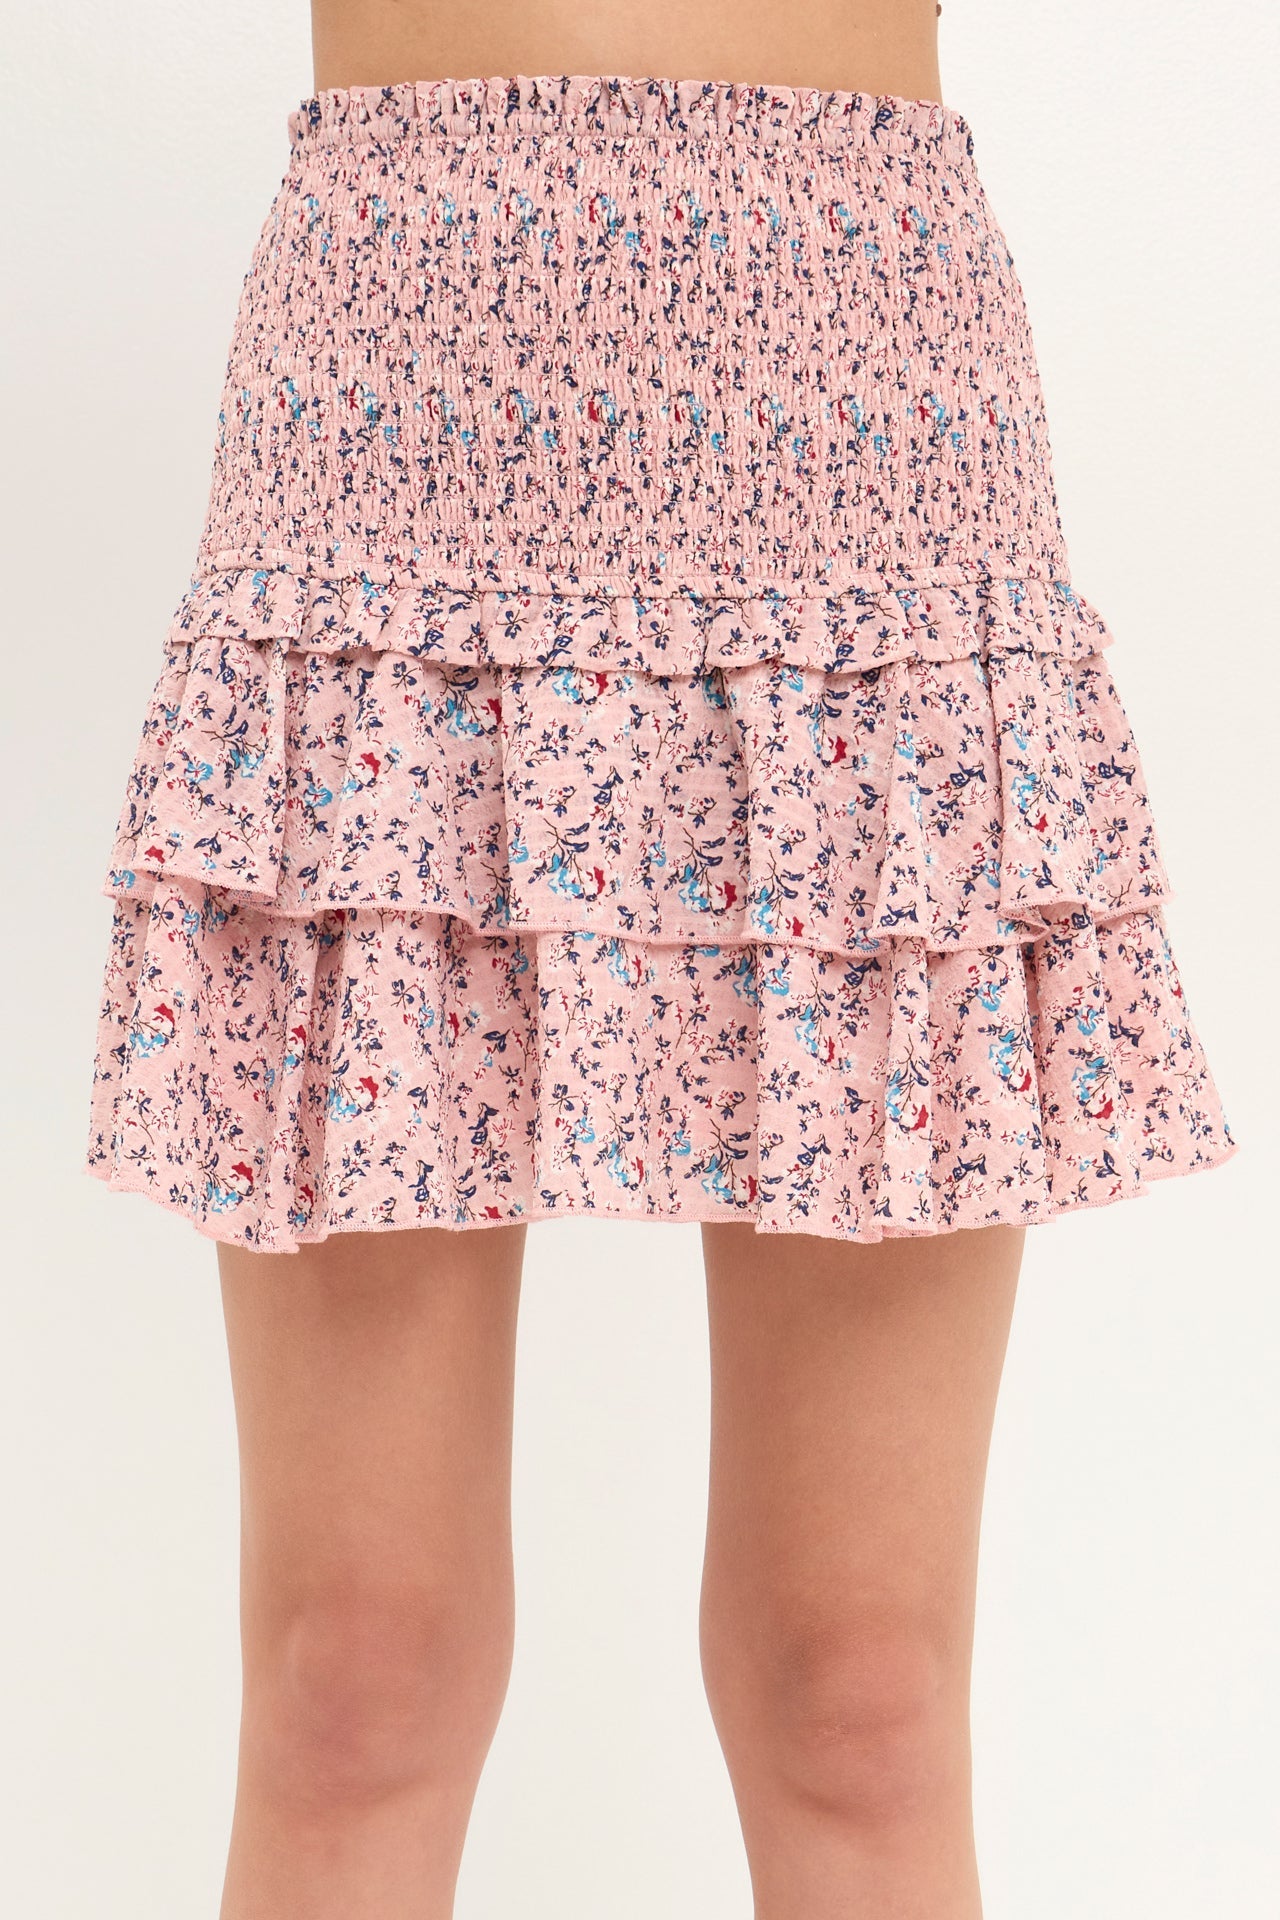 FREE THE ROSES - Smocked Textured Floral Tiered Mini Skirt - SKIRTS available at Objectrare